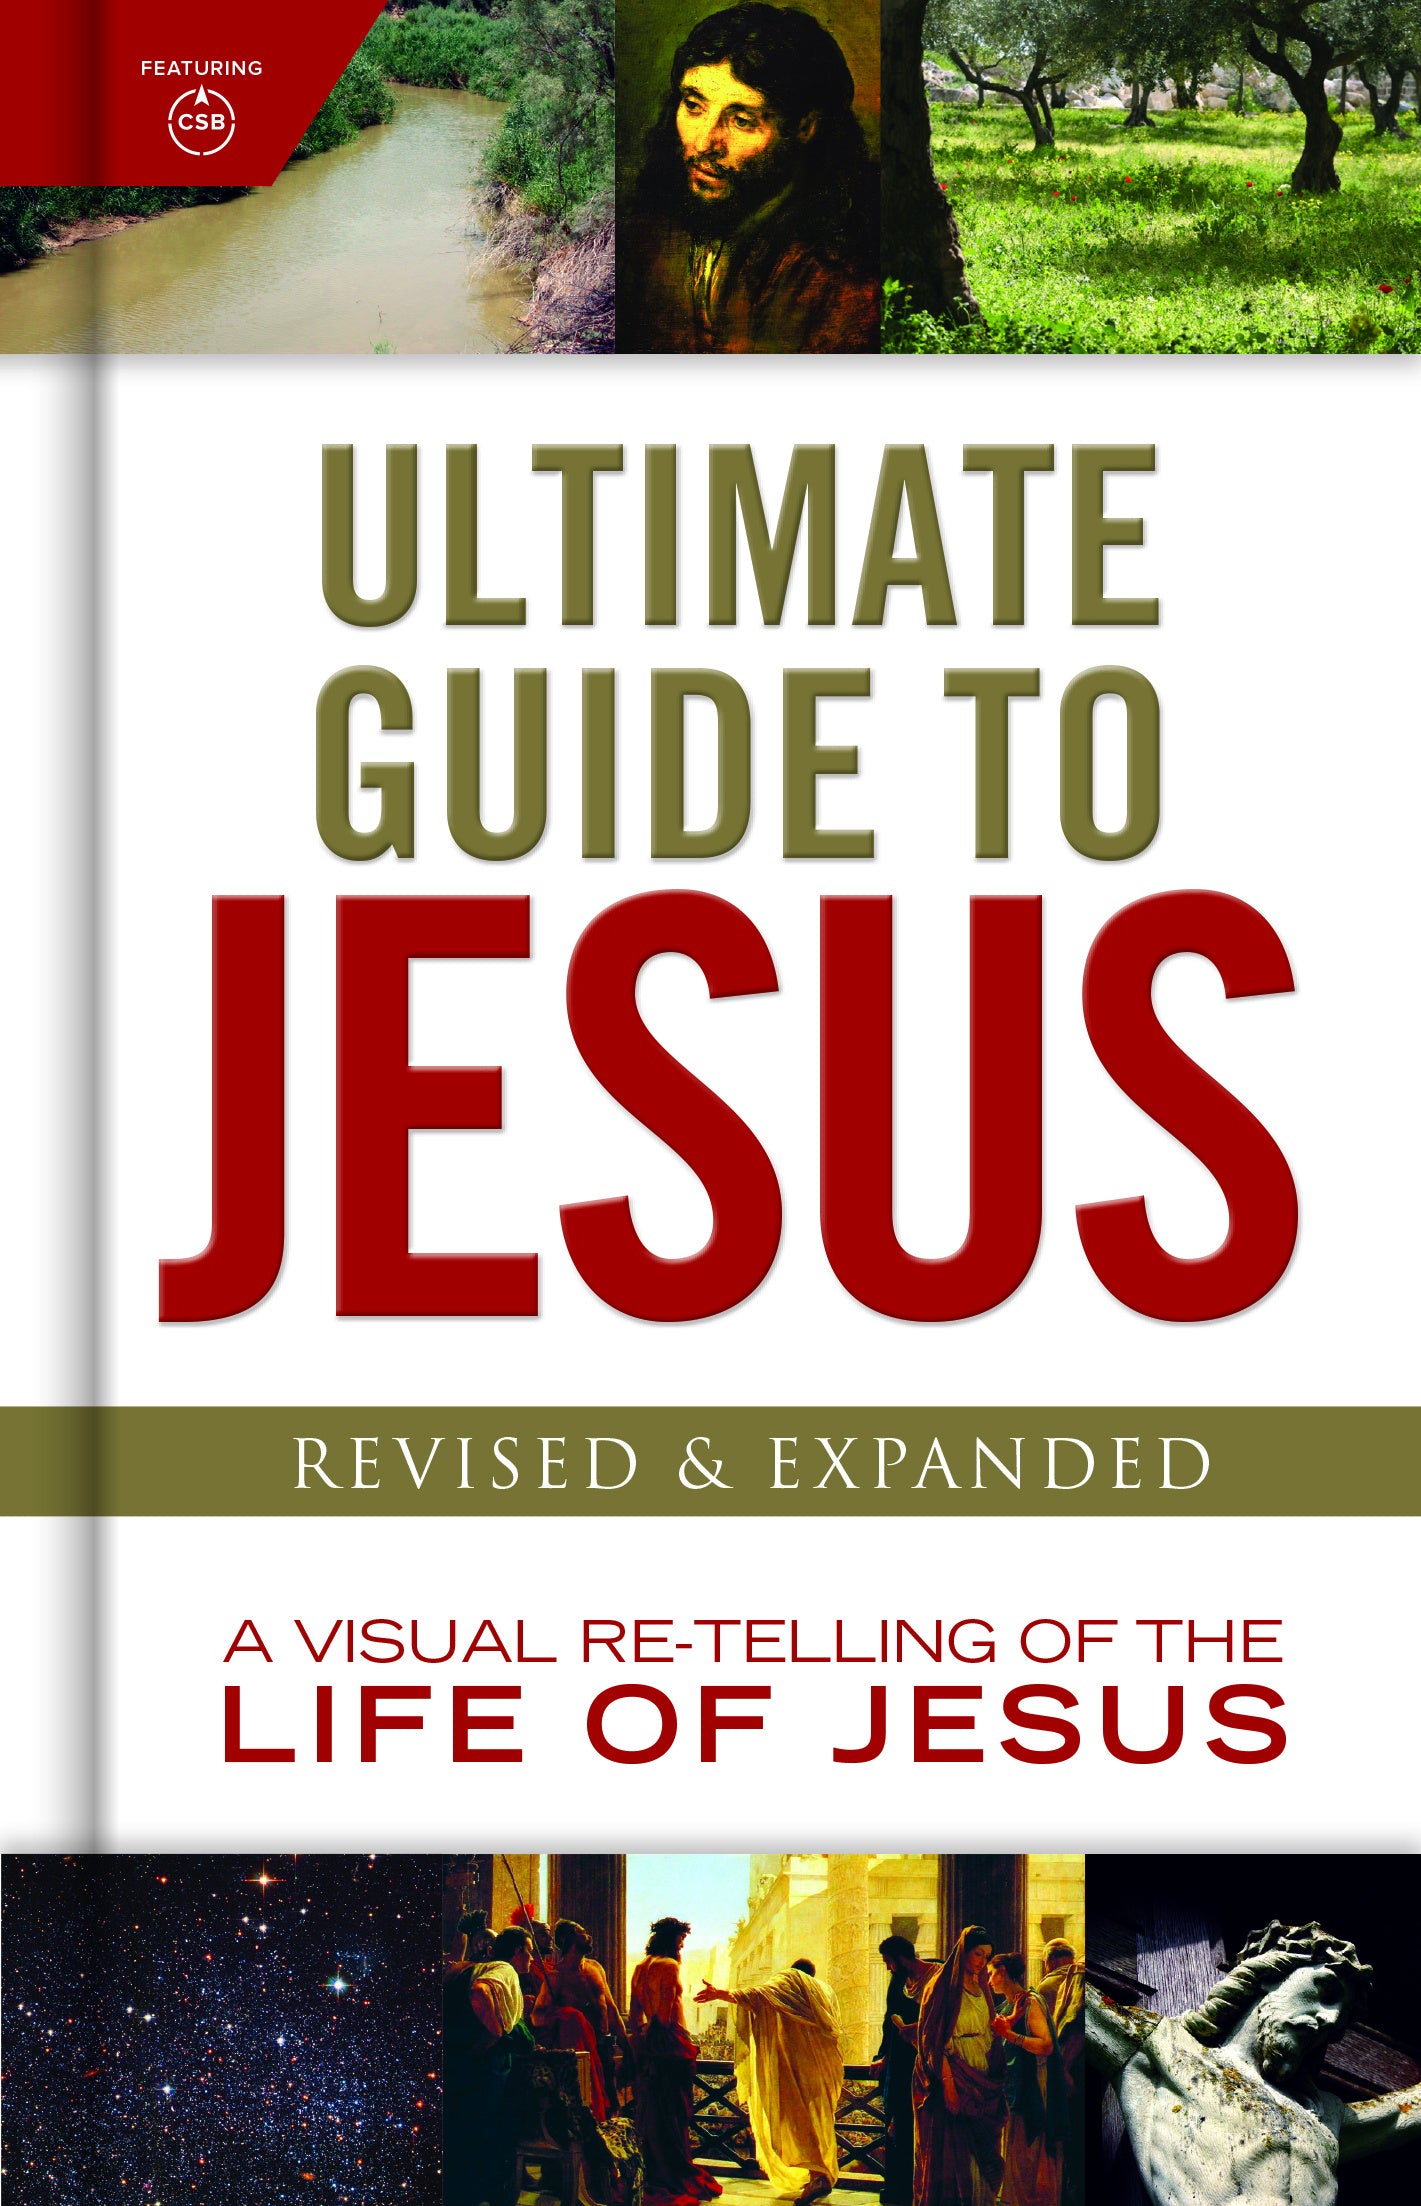 Image of Ultimate Guide to Jesus other